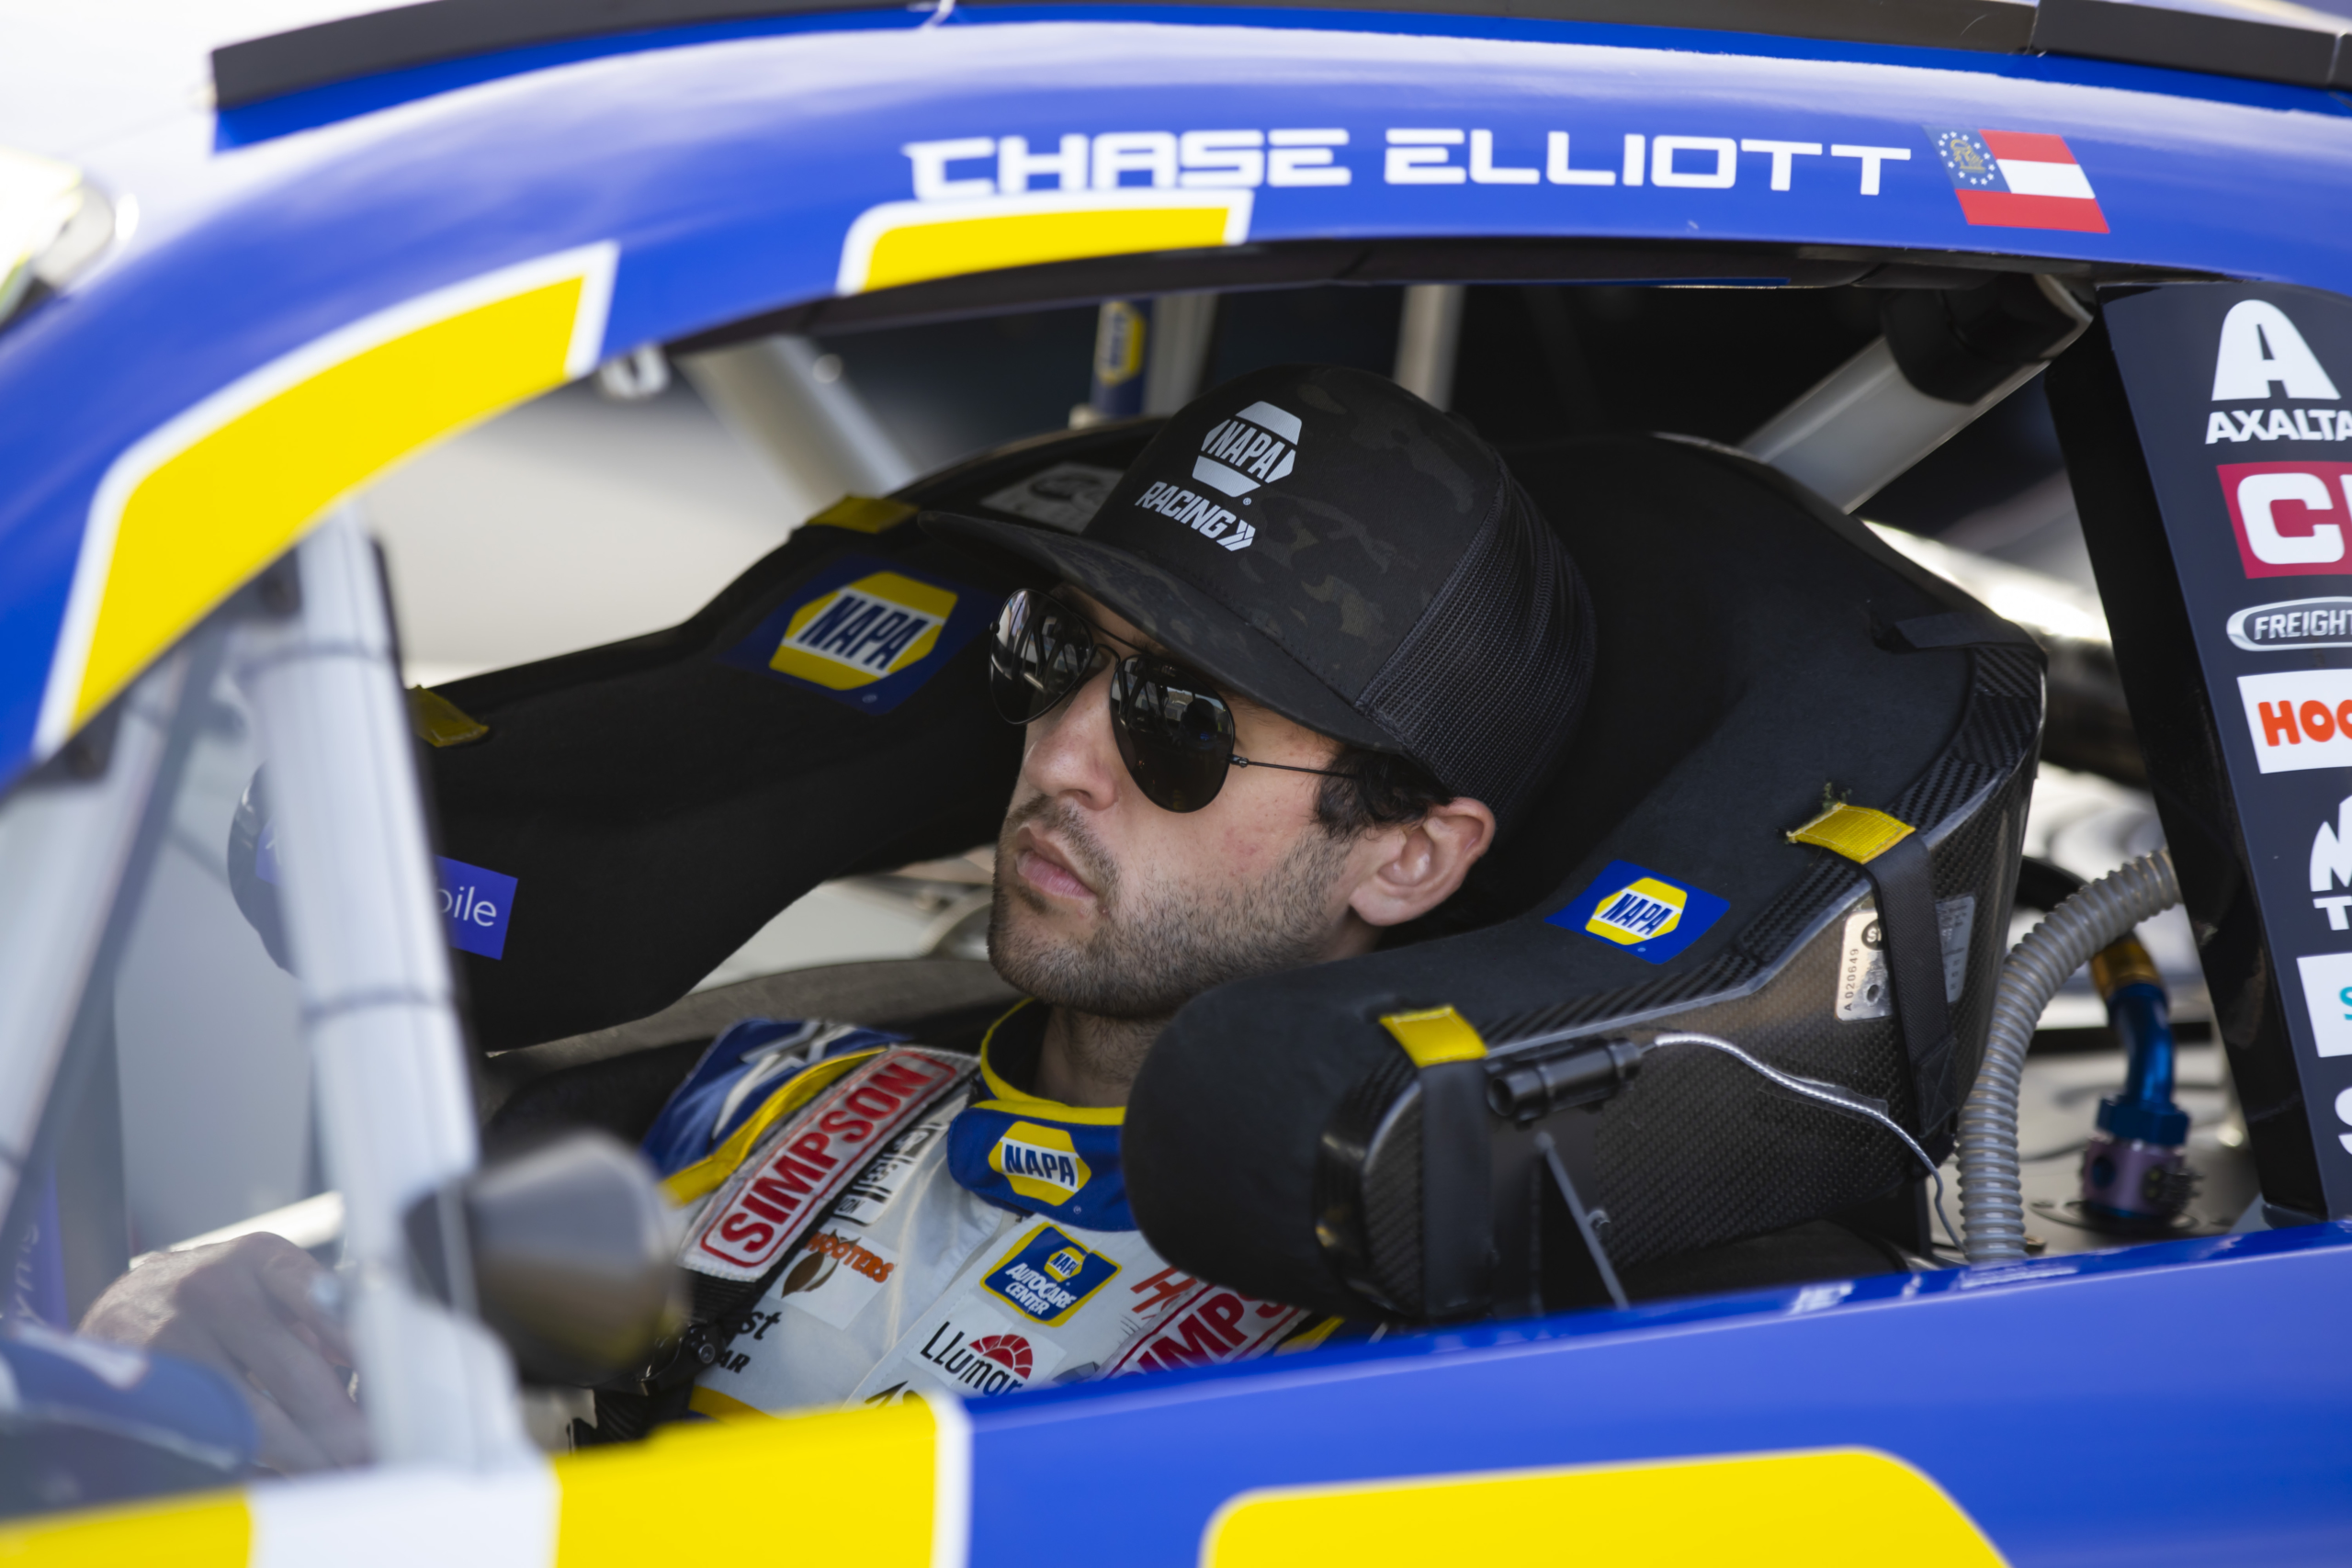 Chase Elliott’s big future in the NASCAR Cup Series